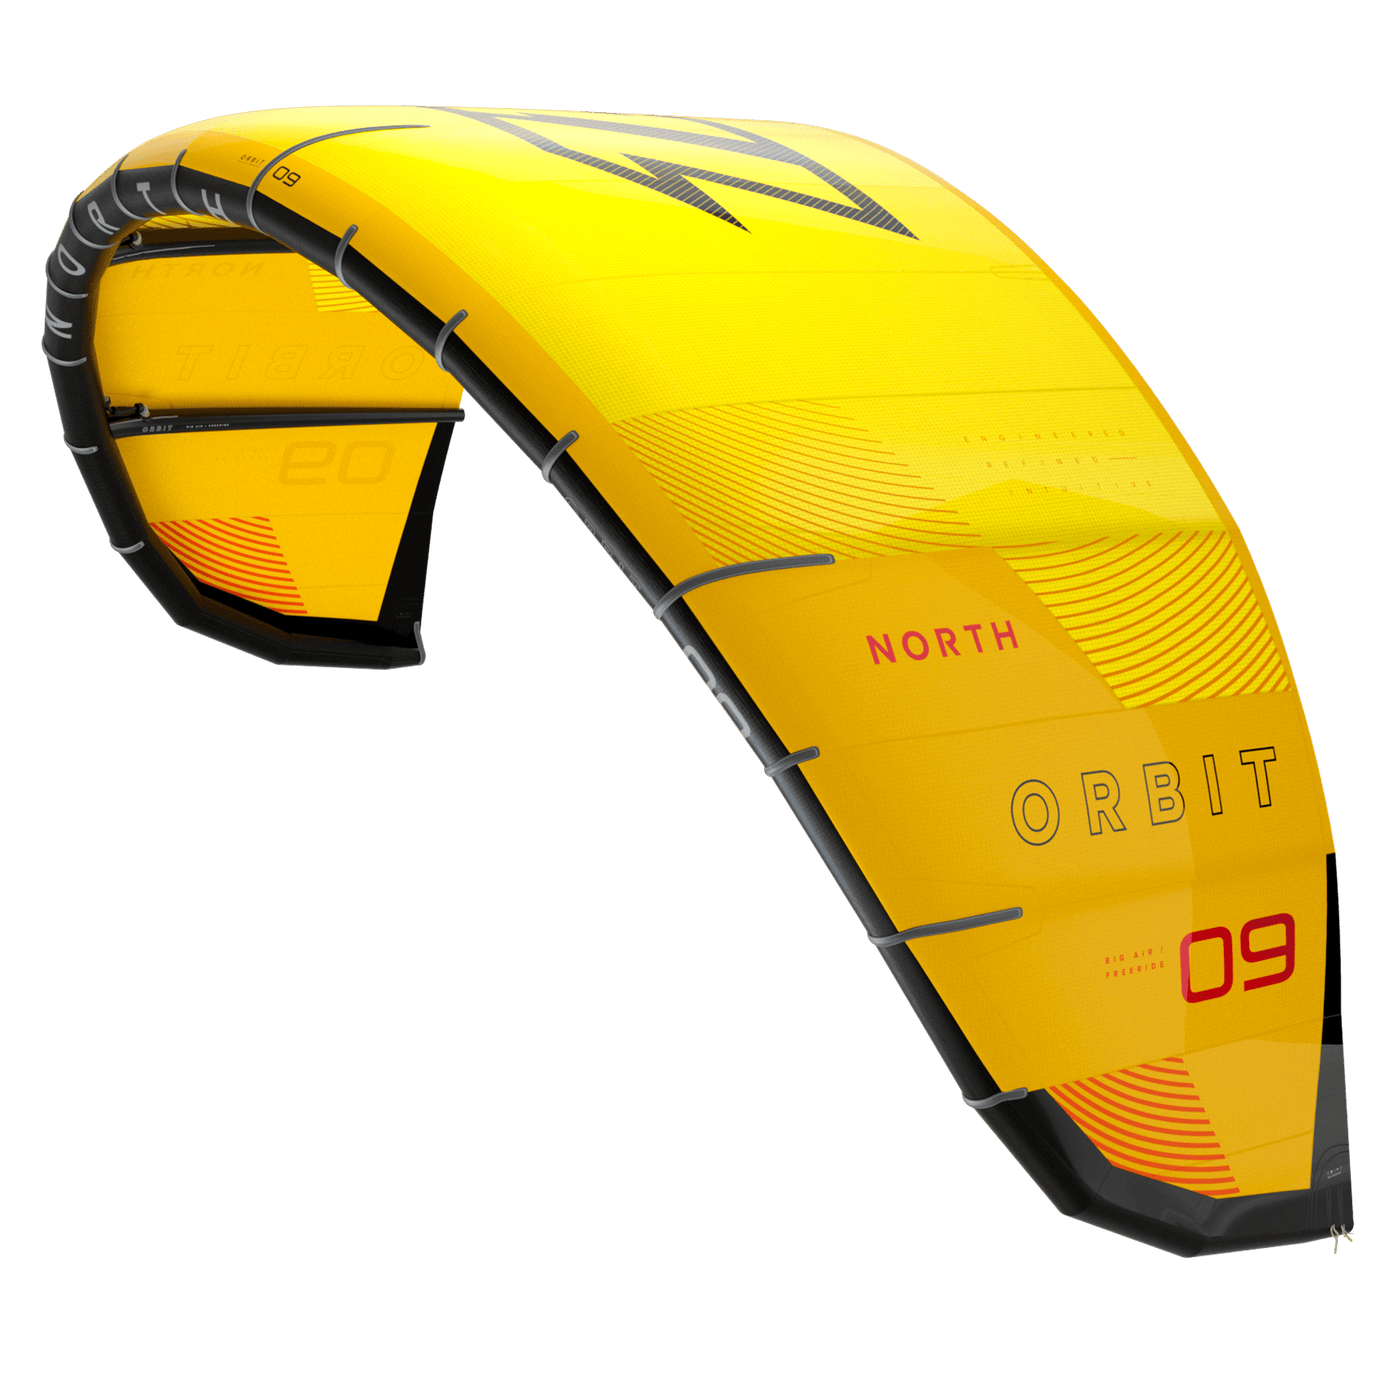 North Orbit 2023 Brand New Design - 9m (King of the Air- Sunset Yellow)-27% off